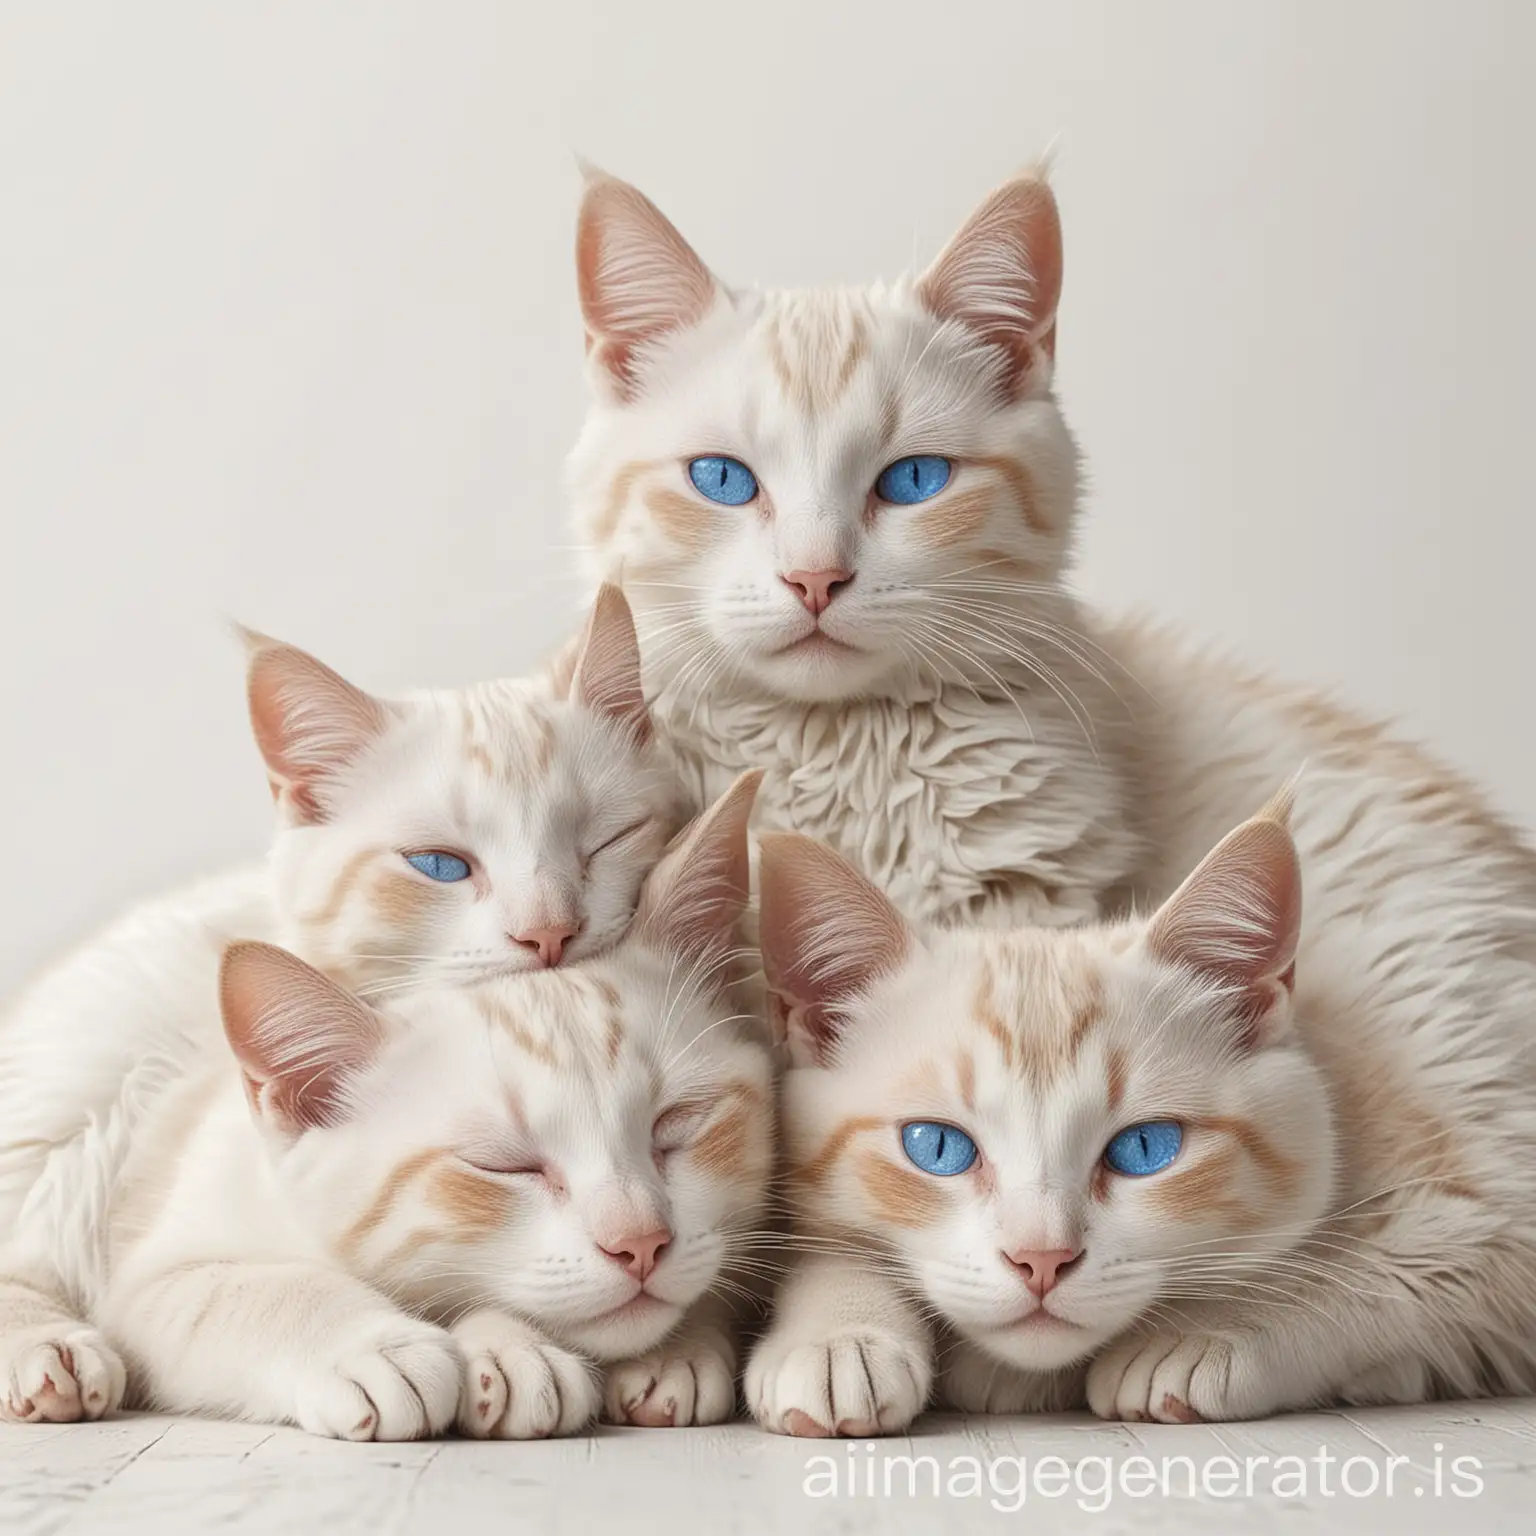 create a full  image of normal size cute  cats with blue eyes sleeping  against a white wall.The image should be very realistic and more rendering. 